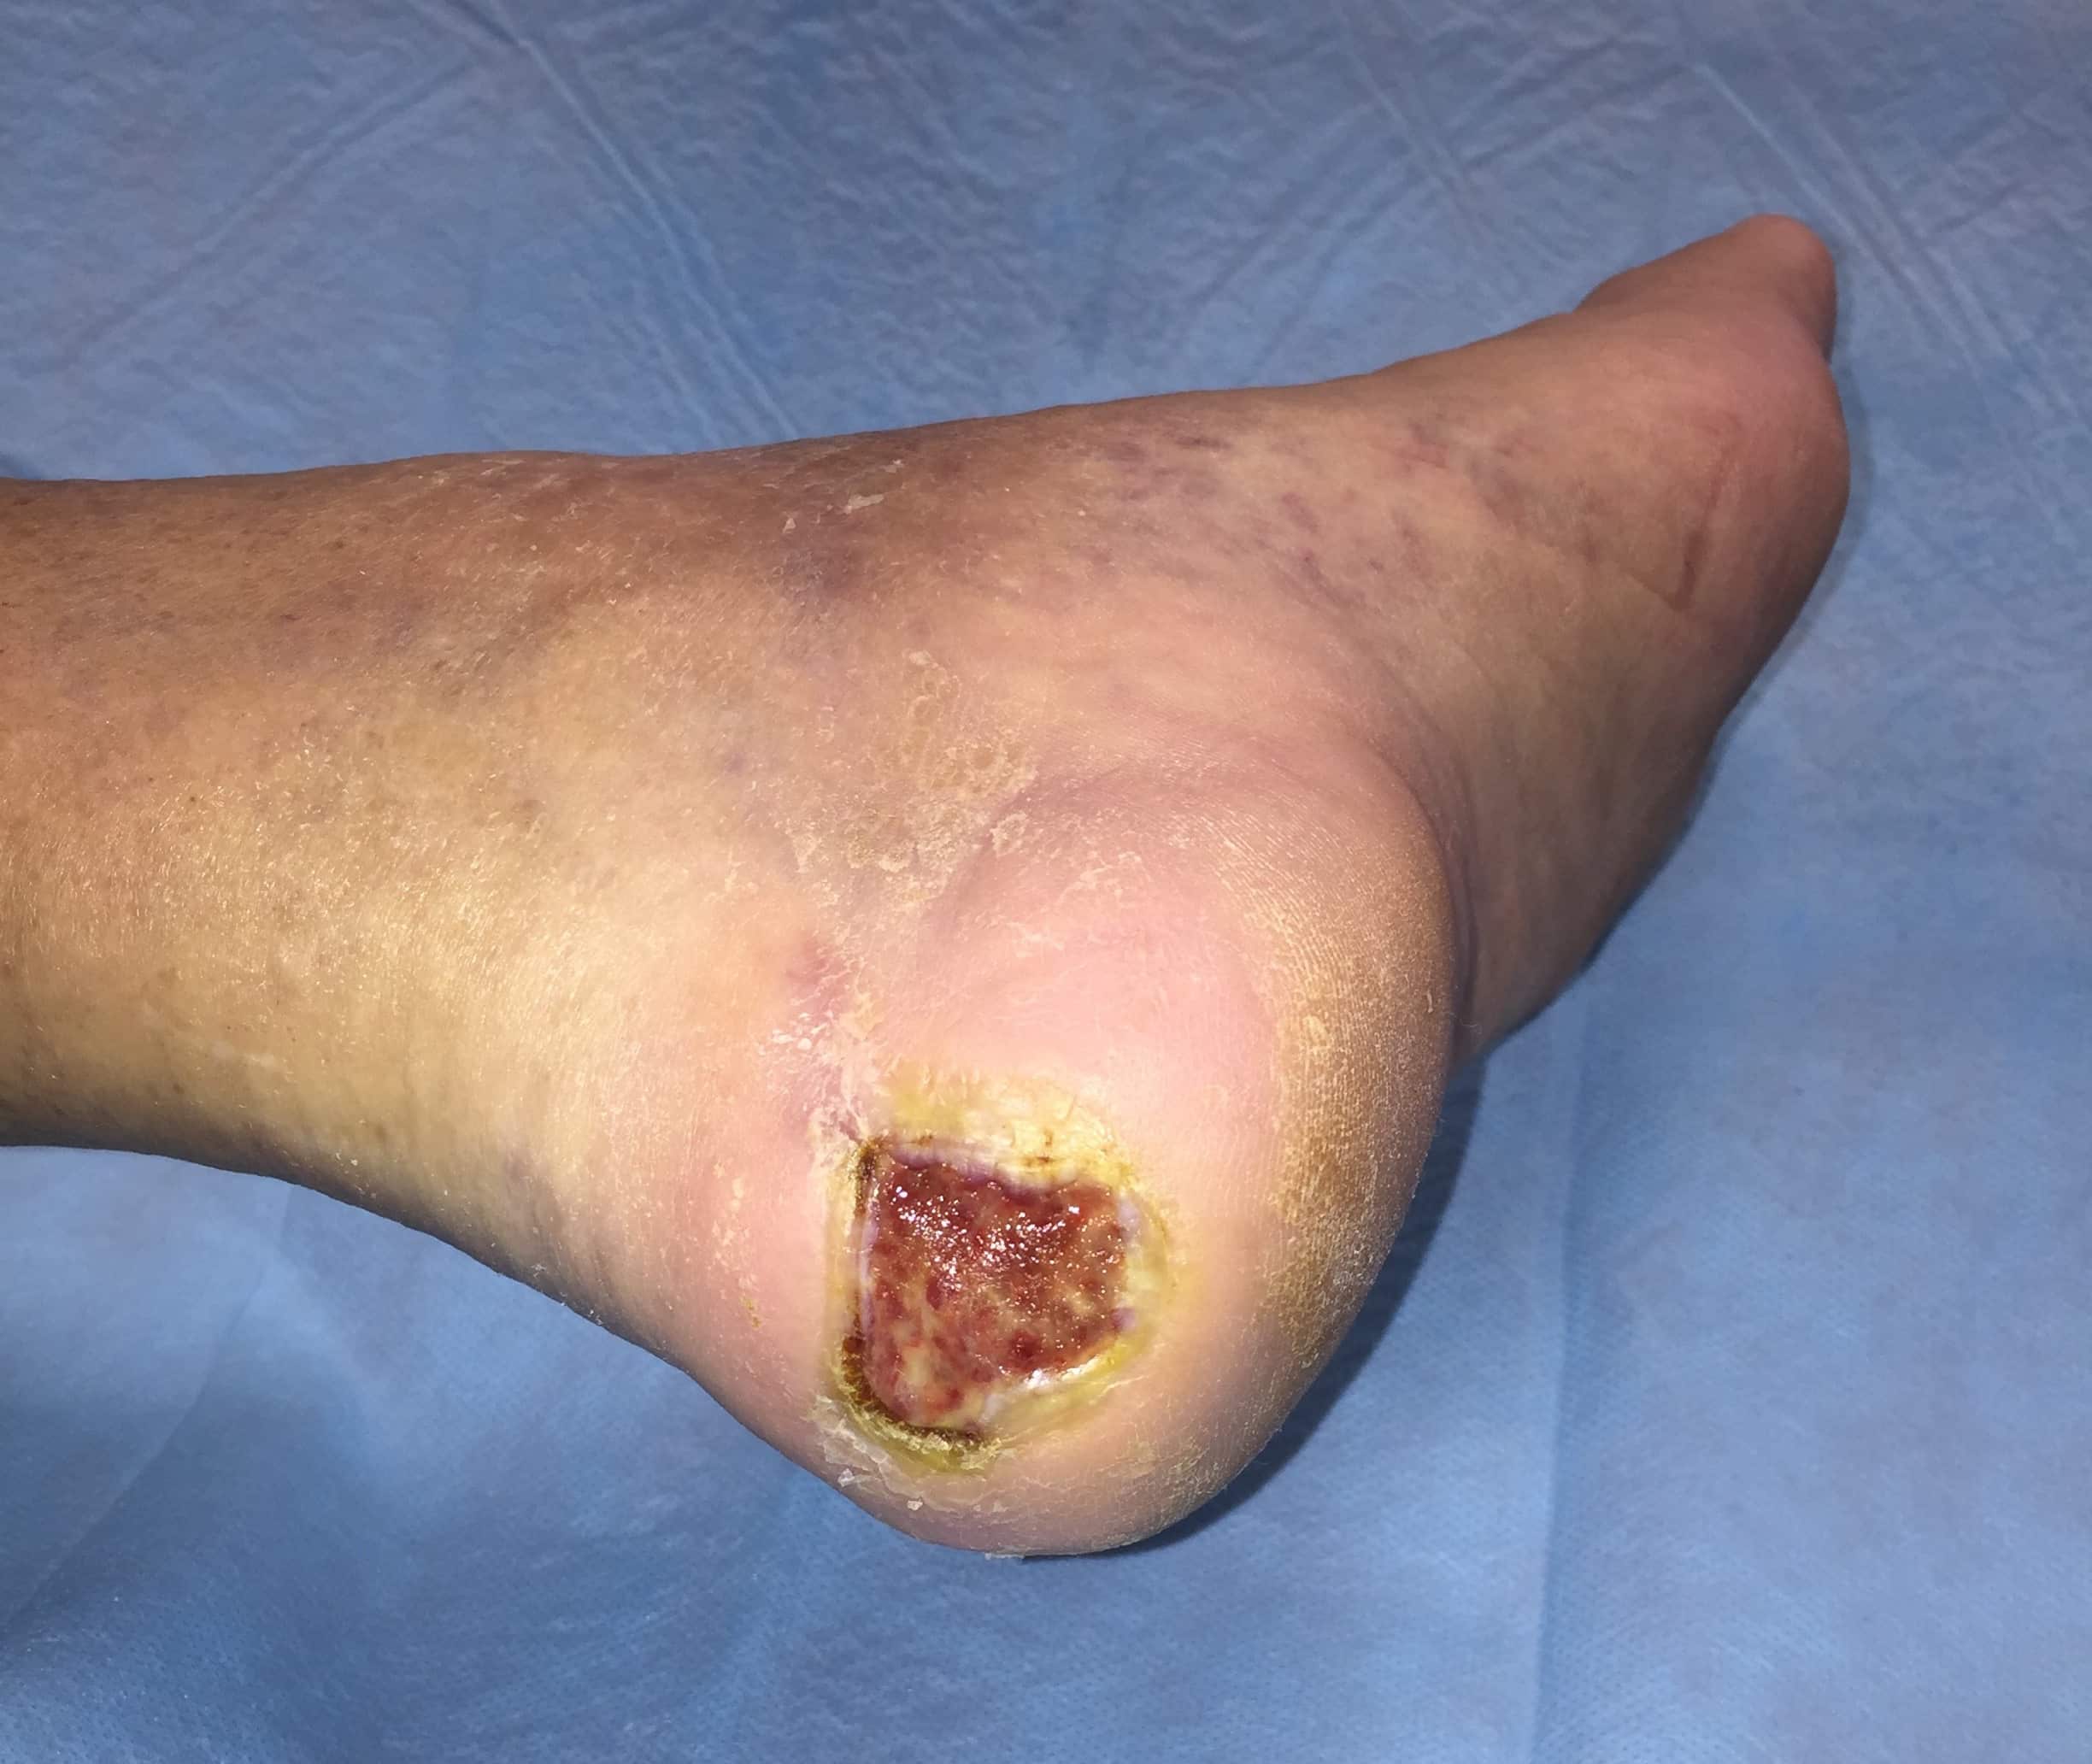 What causes diabetic foot ulcers and how do you manage them?